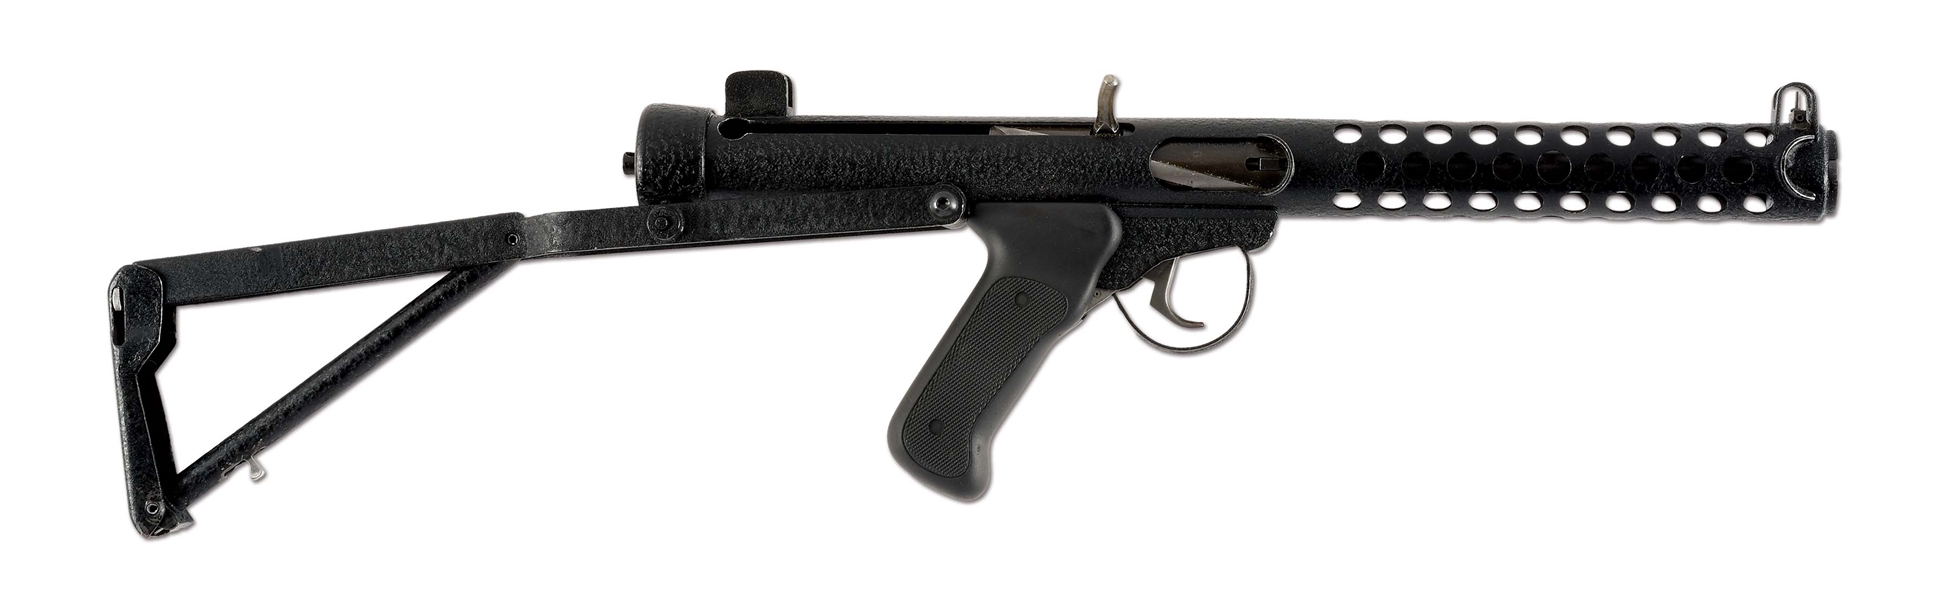 (N) FANTASTIC CONDITION P.A.W.S. INC. MODEL ZX5 COPY OF STERLING MACHINE GUN (FULLY TRANSFERABLE).